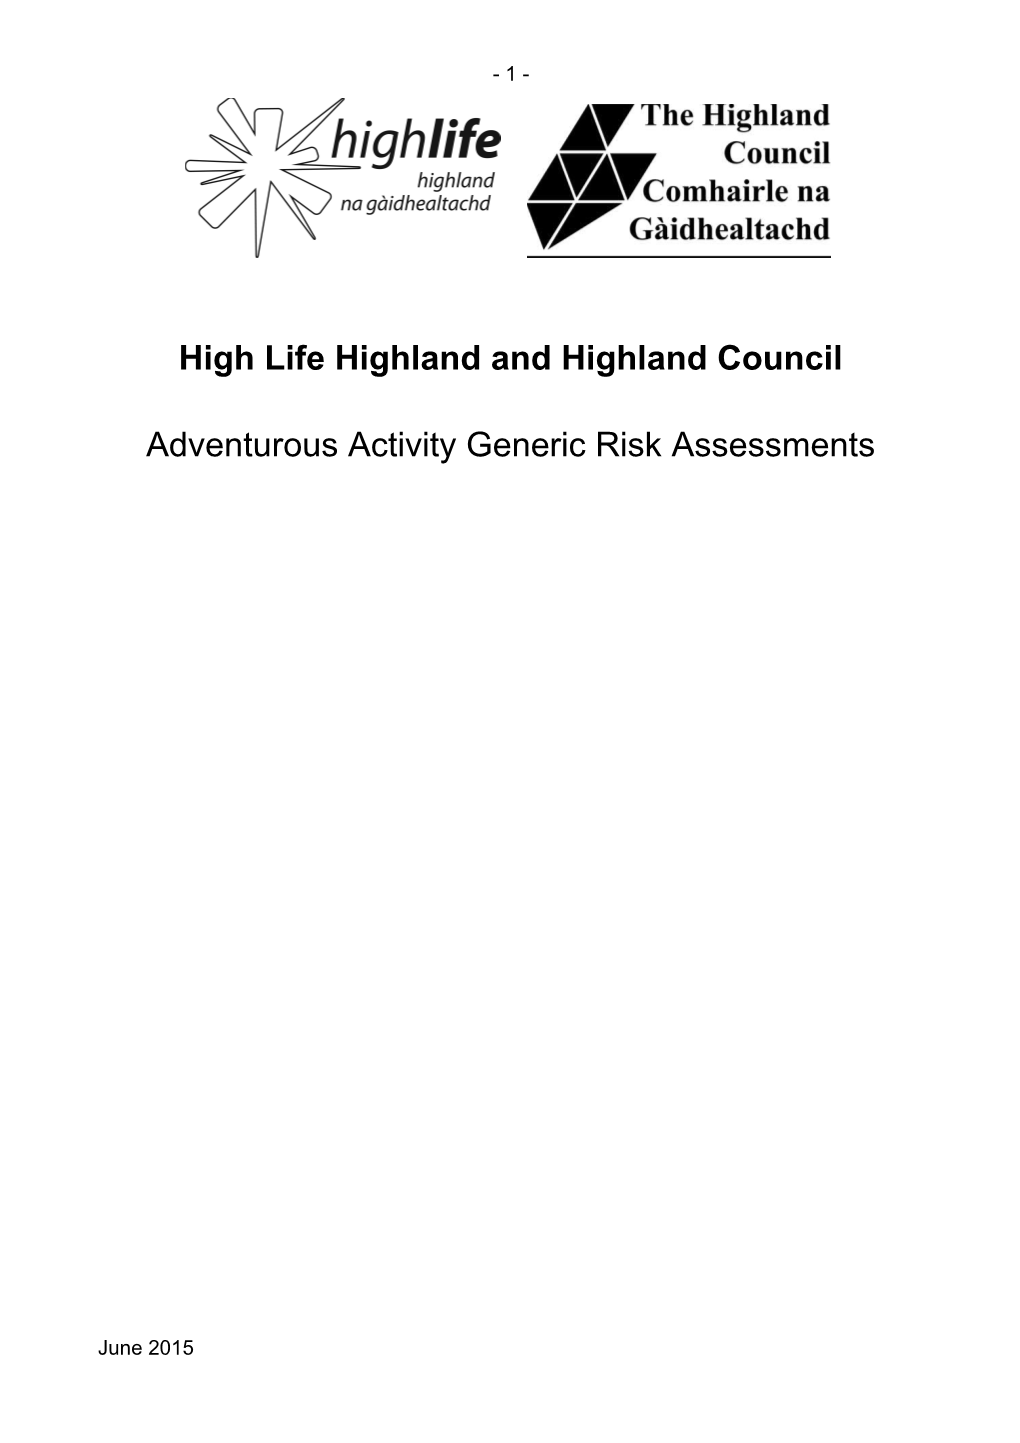 HLH and HC Generic Risk Assessments for Adventurous Activites 2013